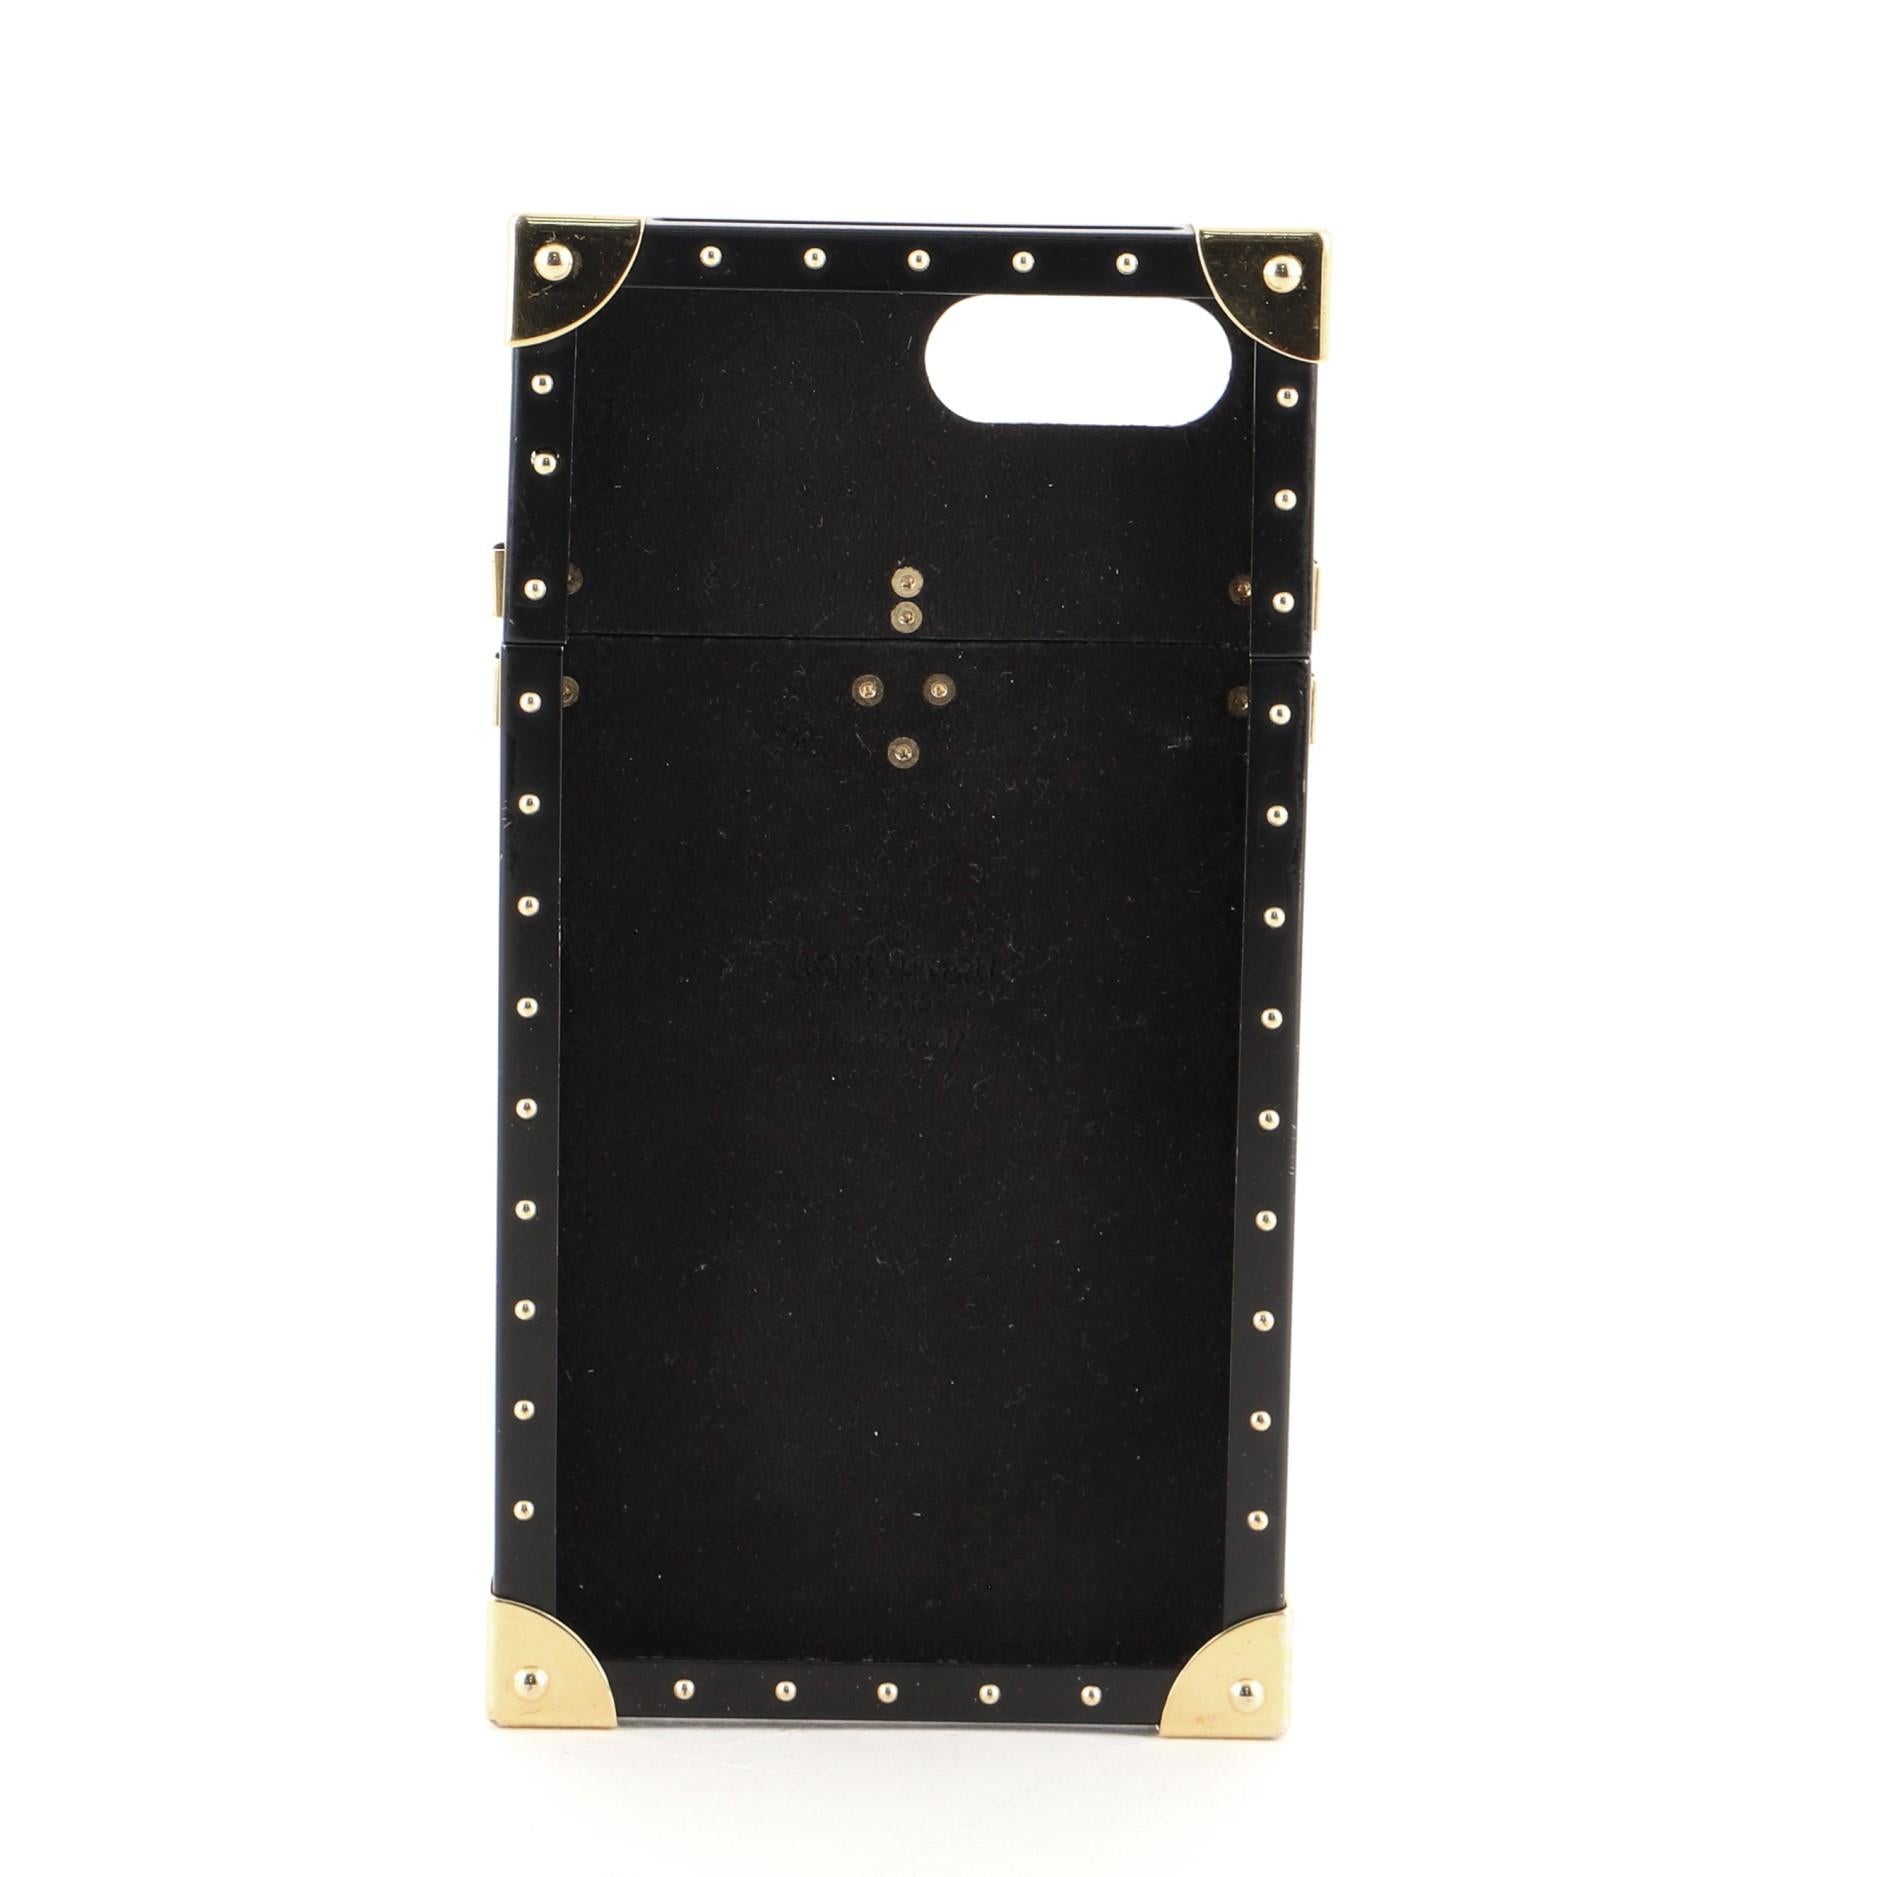 Louis Vuitton Eye Trunk with Strap for iPhone X Plus Reverse Monogram Canvas
Monogram Reverse

Condition Details: Loose stud hardware. Moderate scuffs and wear on exterior trim, scratches on hardware.

45086MSC

Height 6.5